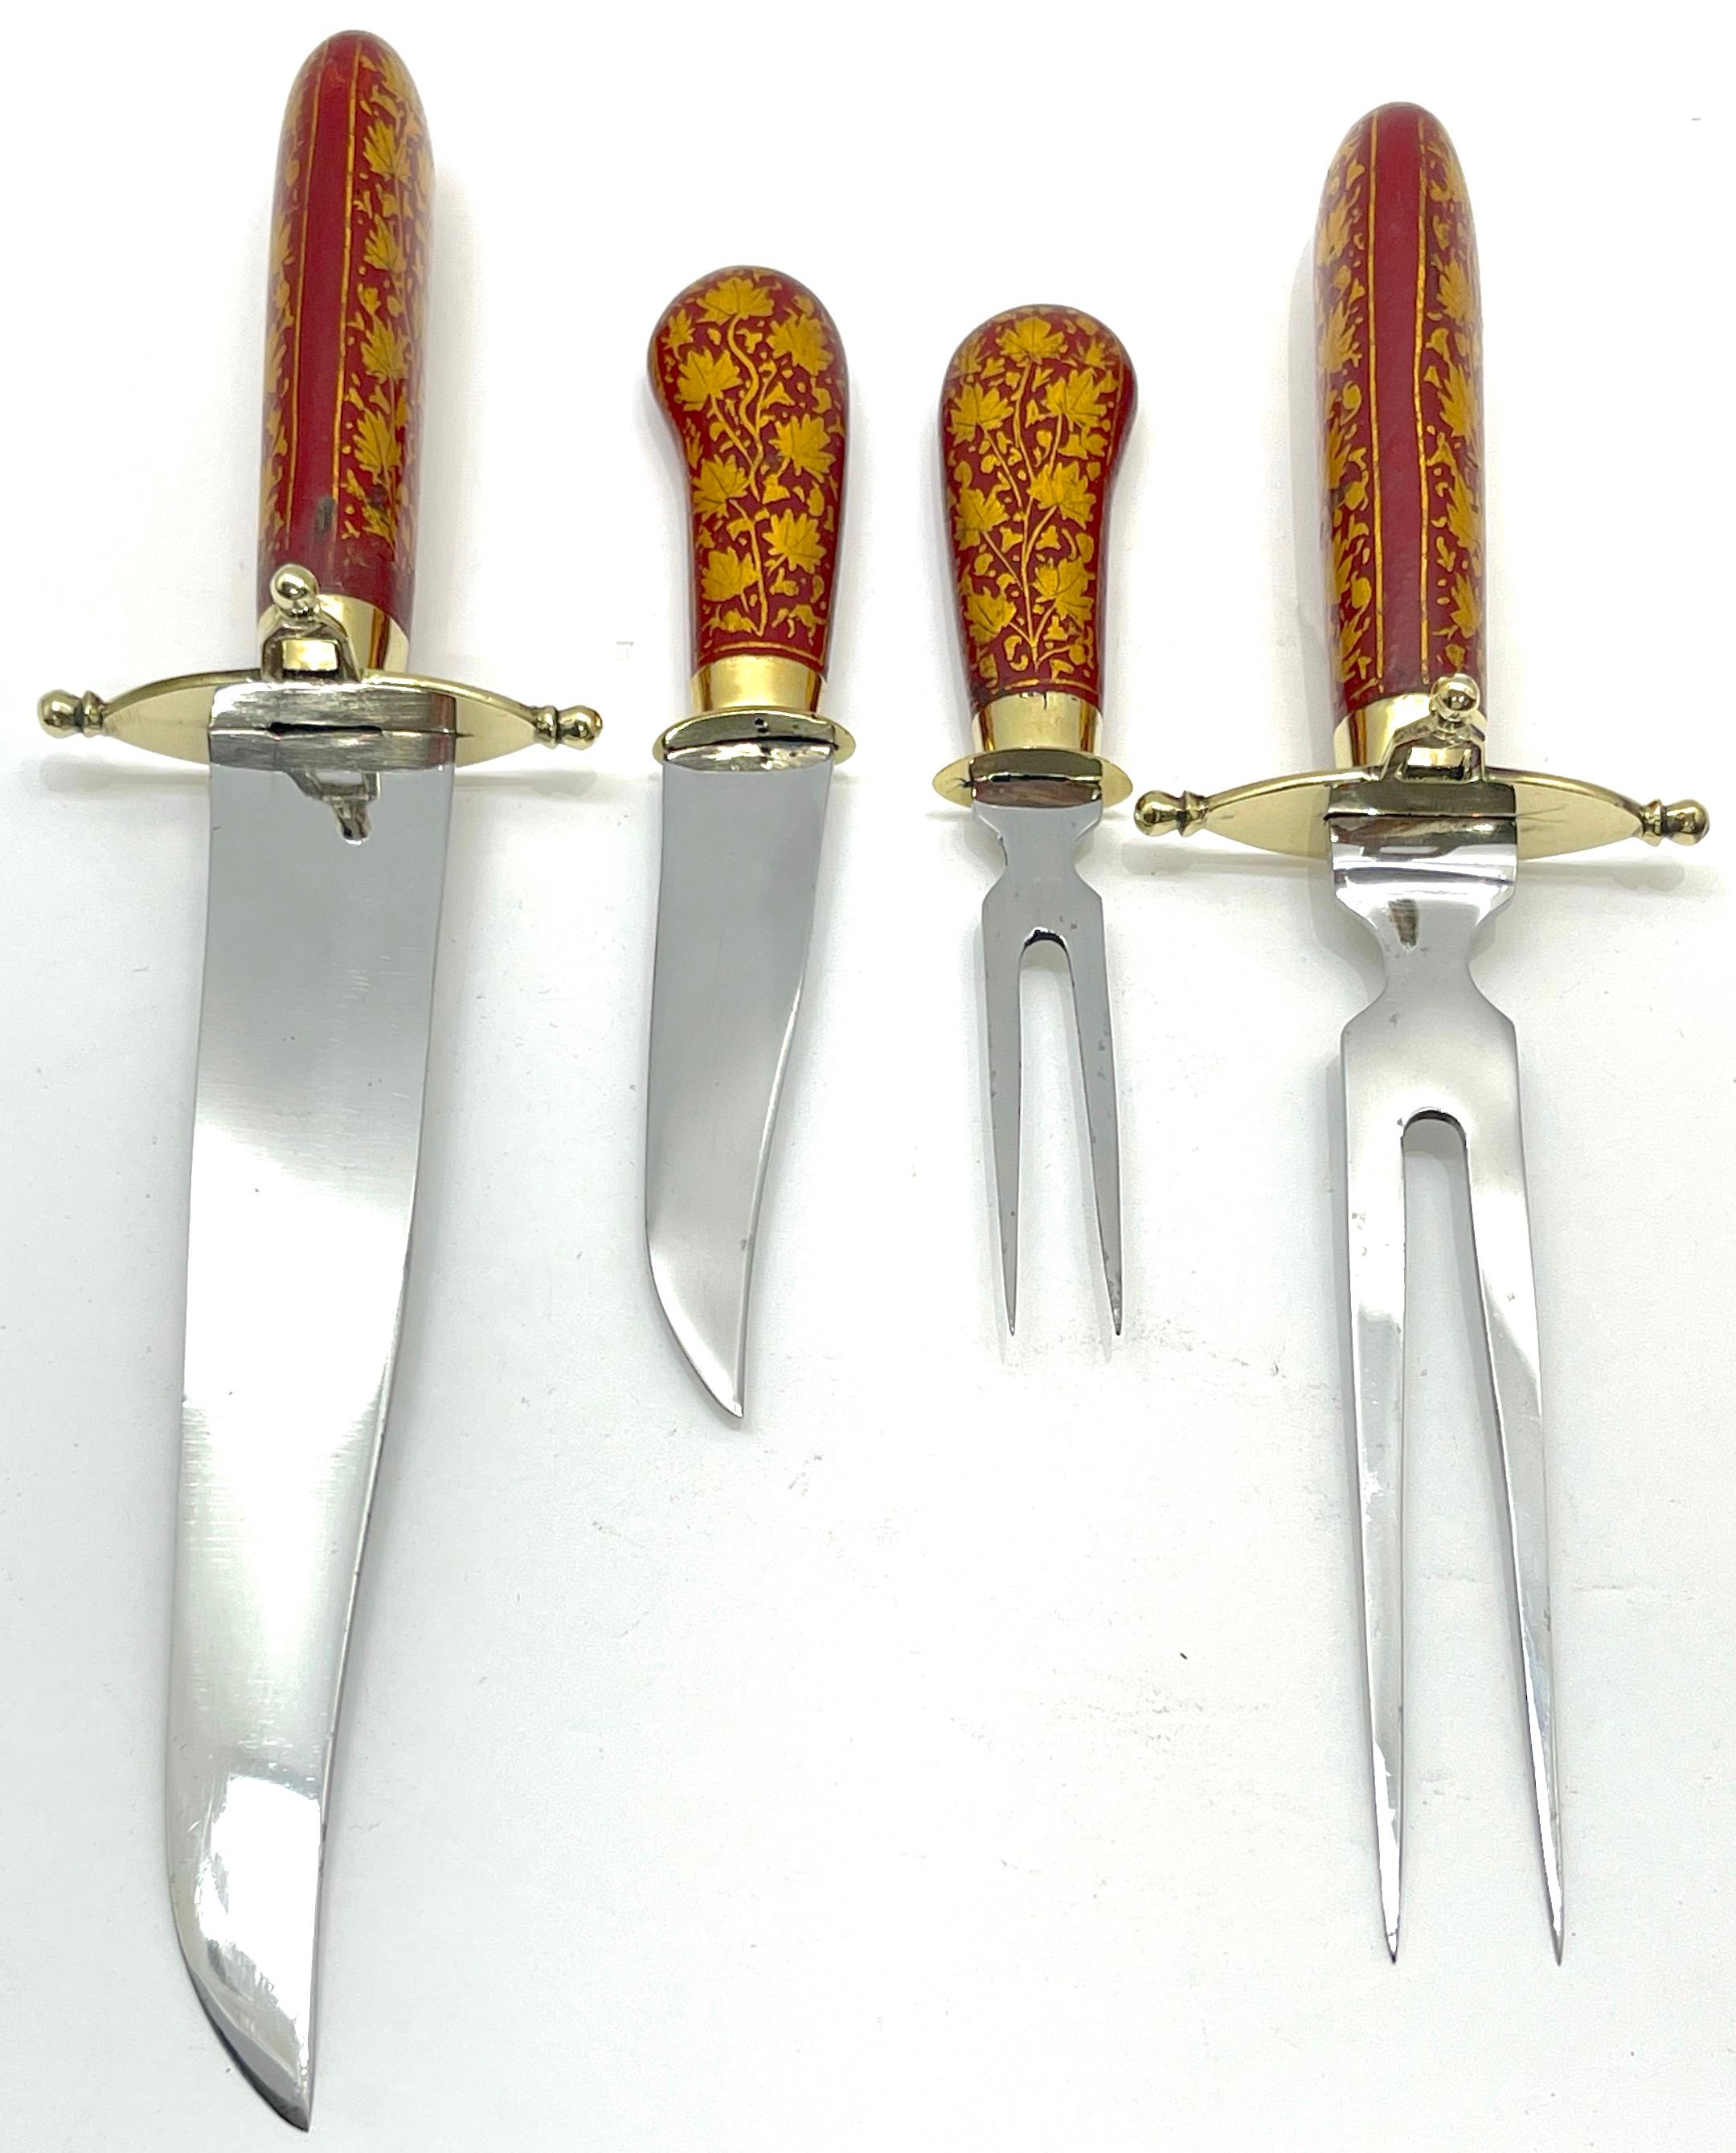 Anglo-Indian Red and Gilt Lacquer and Brass Carving Set For Sale 6